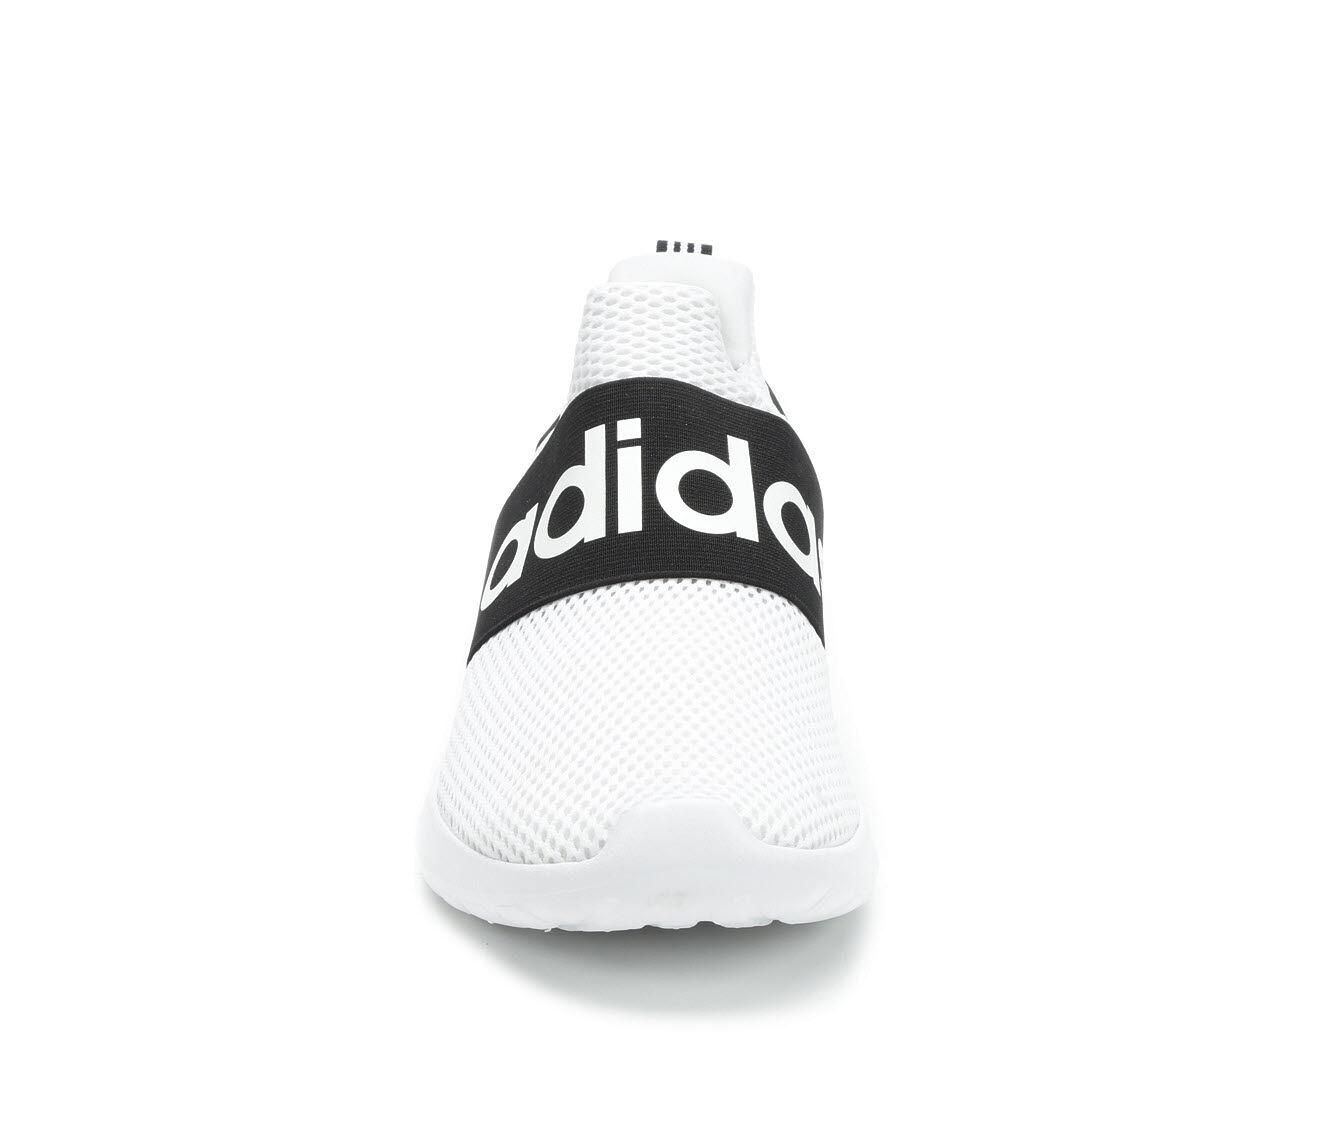 adidas Cloudfoam Lite Racer Adapt Athletic Shoe in White,Black (White ...